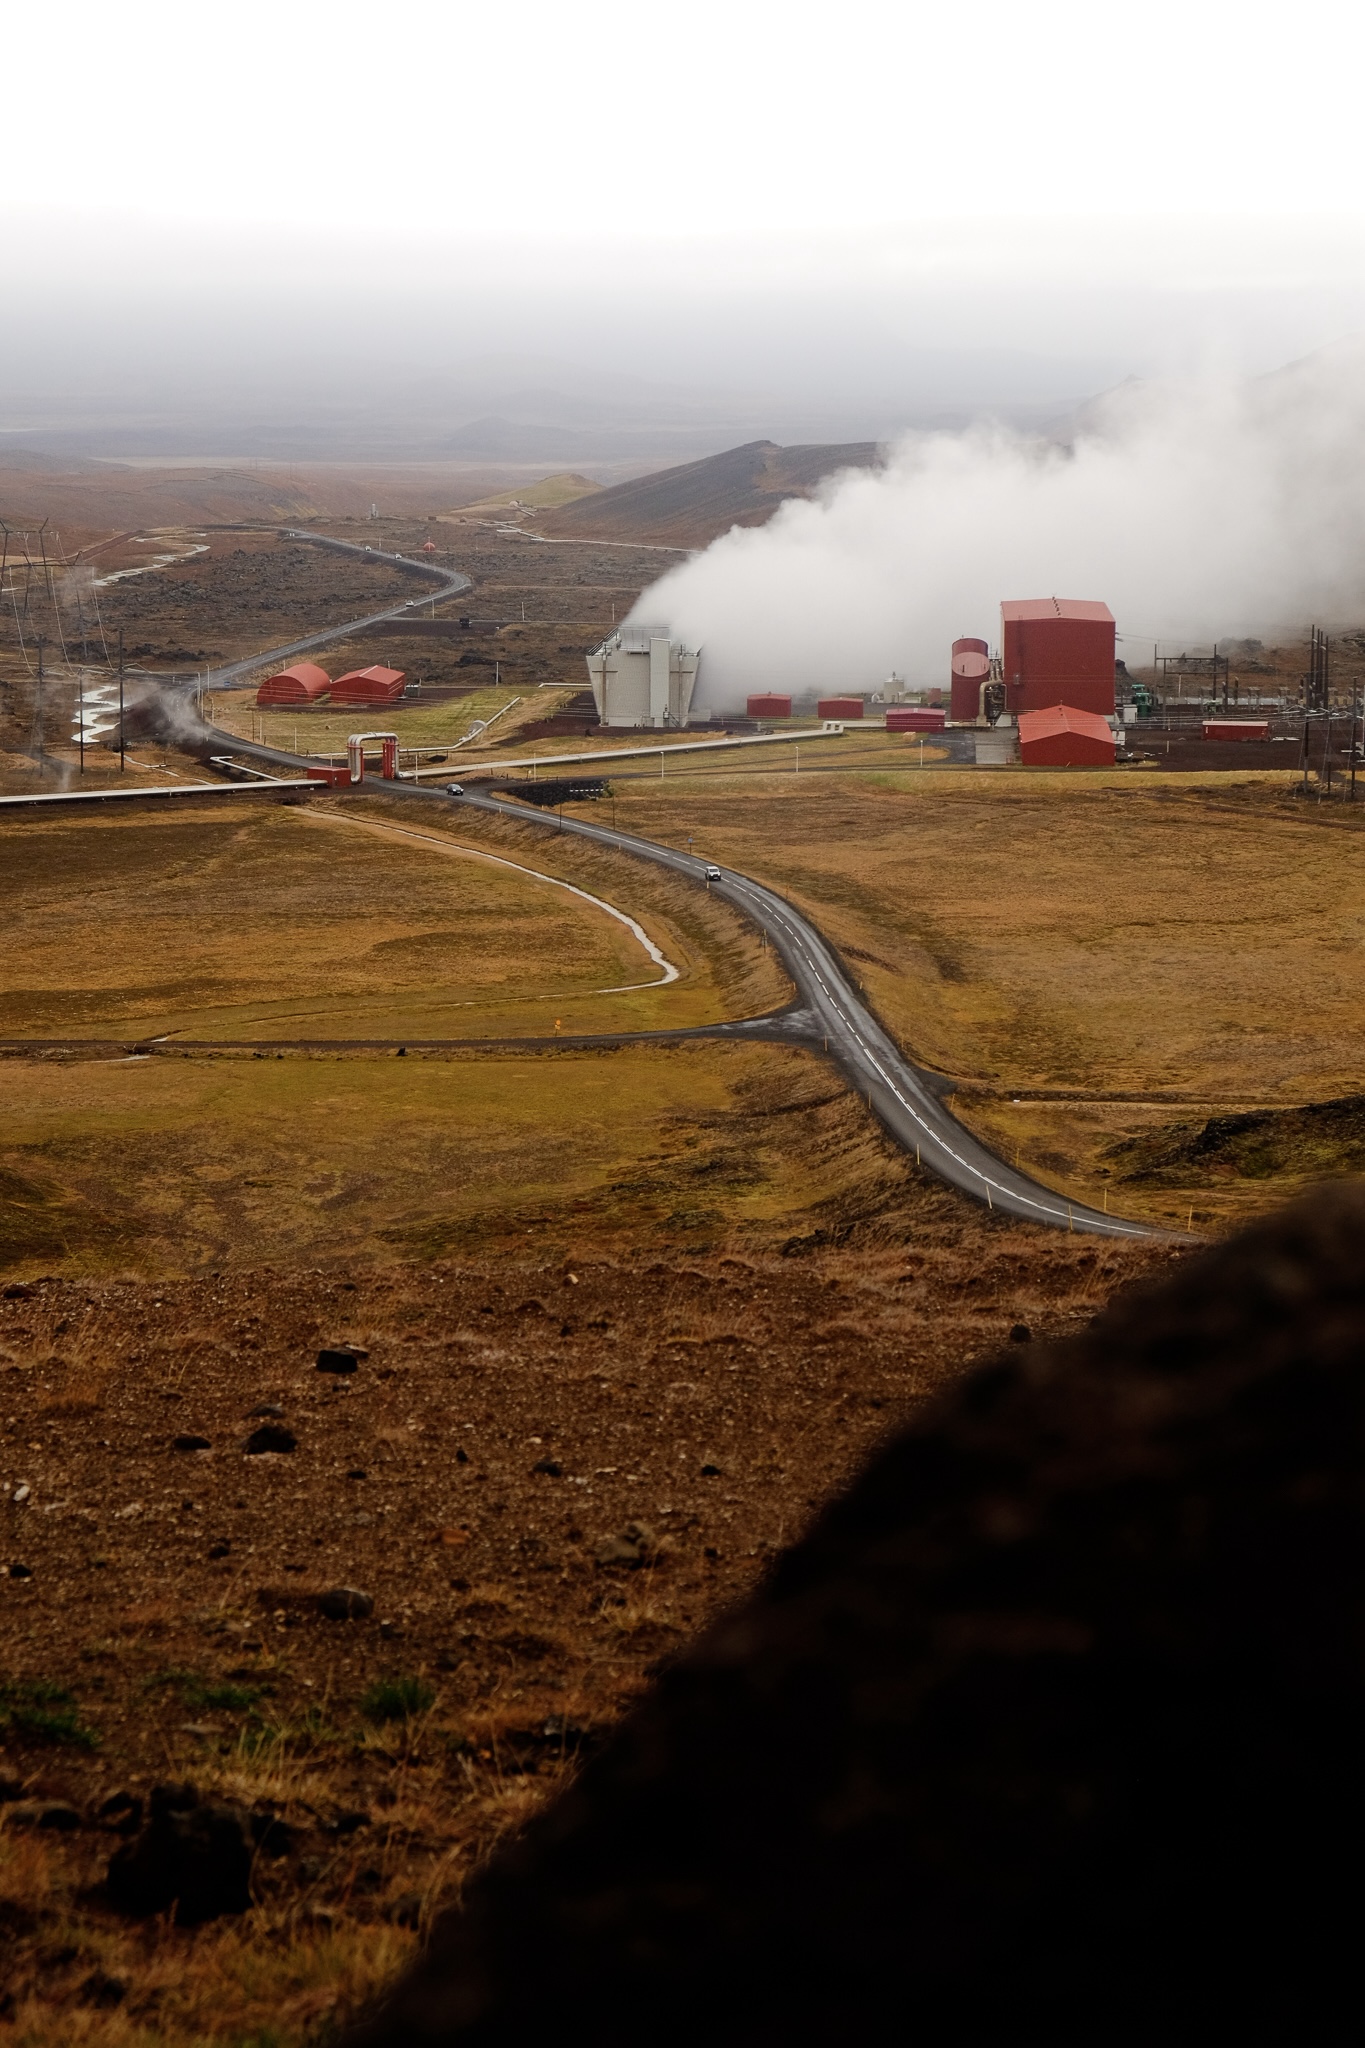 A geothermal powerplant of red buildings is gushing with white steam against a brown and yellow landscape